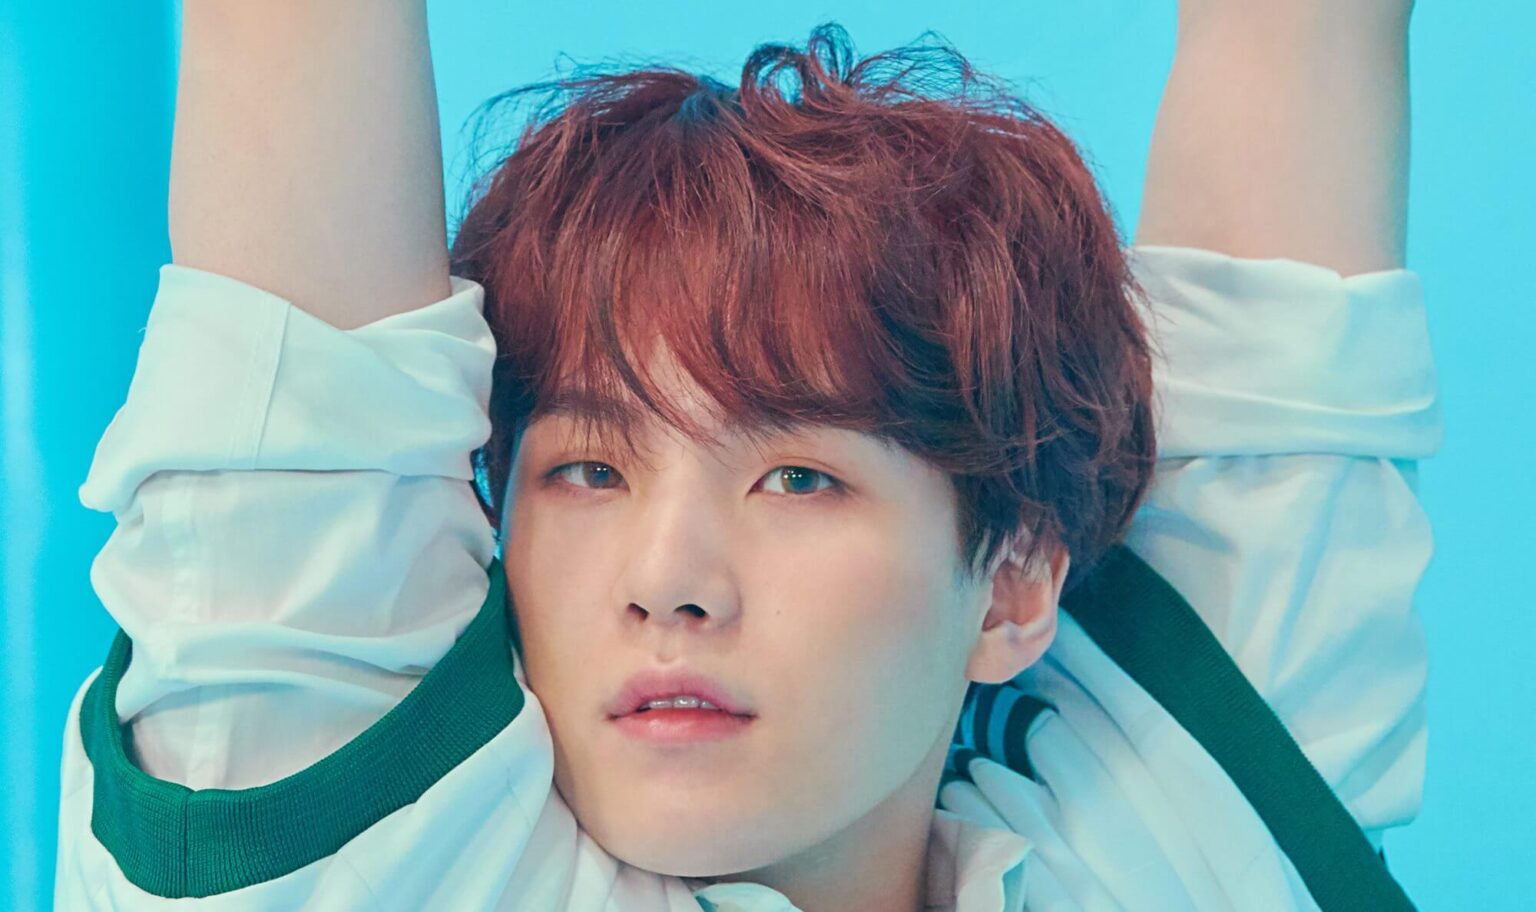 Is Suga your favorite member of BTS? Here are some of Suga's hit singles made with musicians outside of BTS.